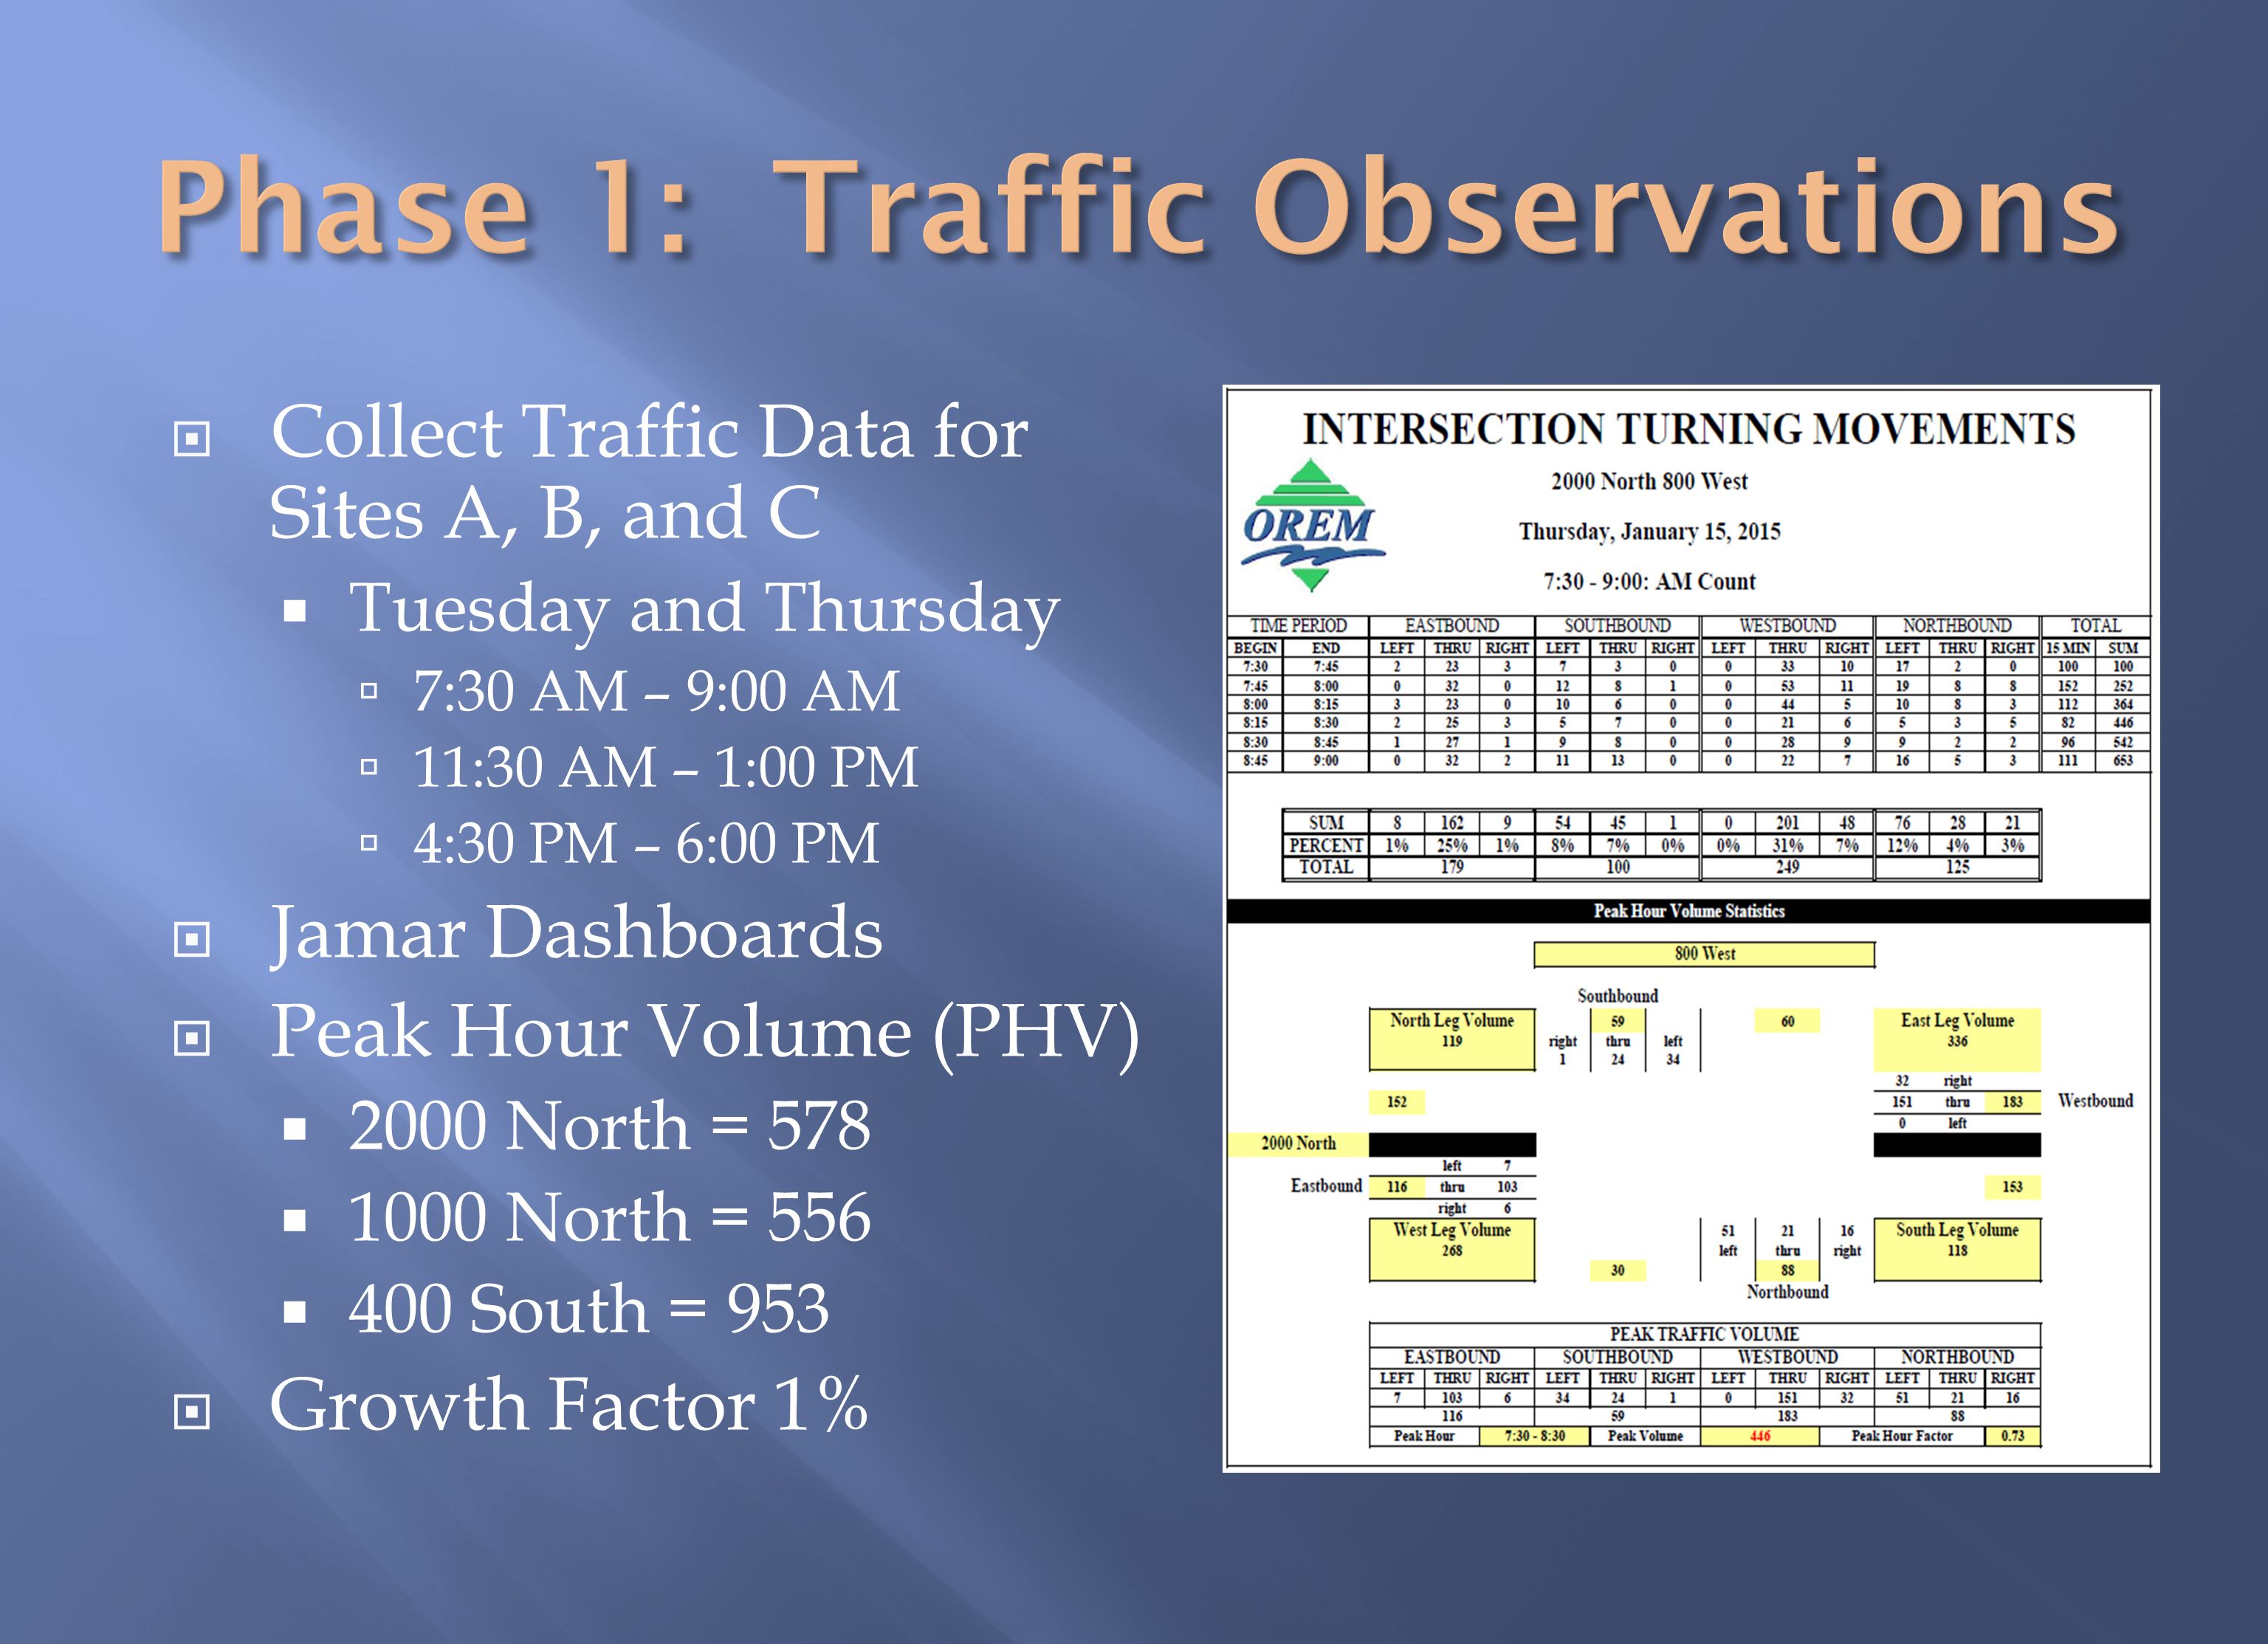  Collect Traffic Data for Sites A, B, and C  Tuesday and Thursday  7:30 AM – 9:00 AM  11:30 AM – 1:00 PM  4:30 PM – 6:00 PM  Jamar Dashboards  Peak Hour Volume (PHV)  2000 North = 578  1000 North = 556  400 South = 953  Growth Factor 1%